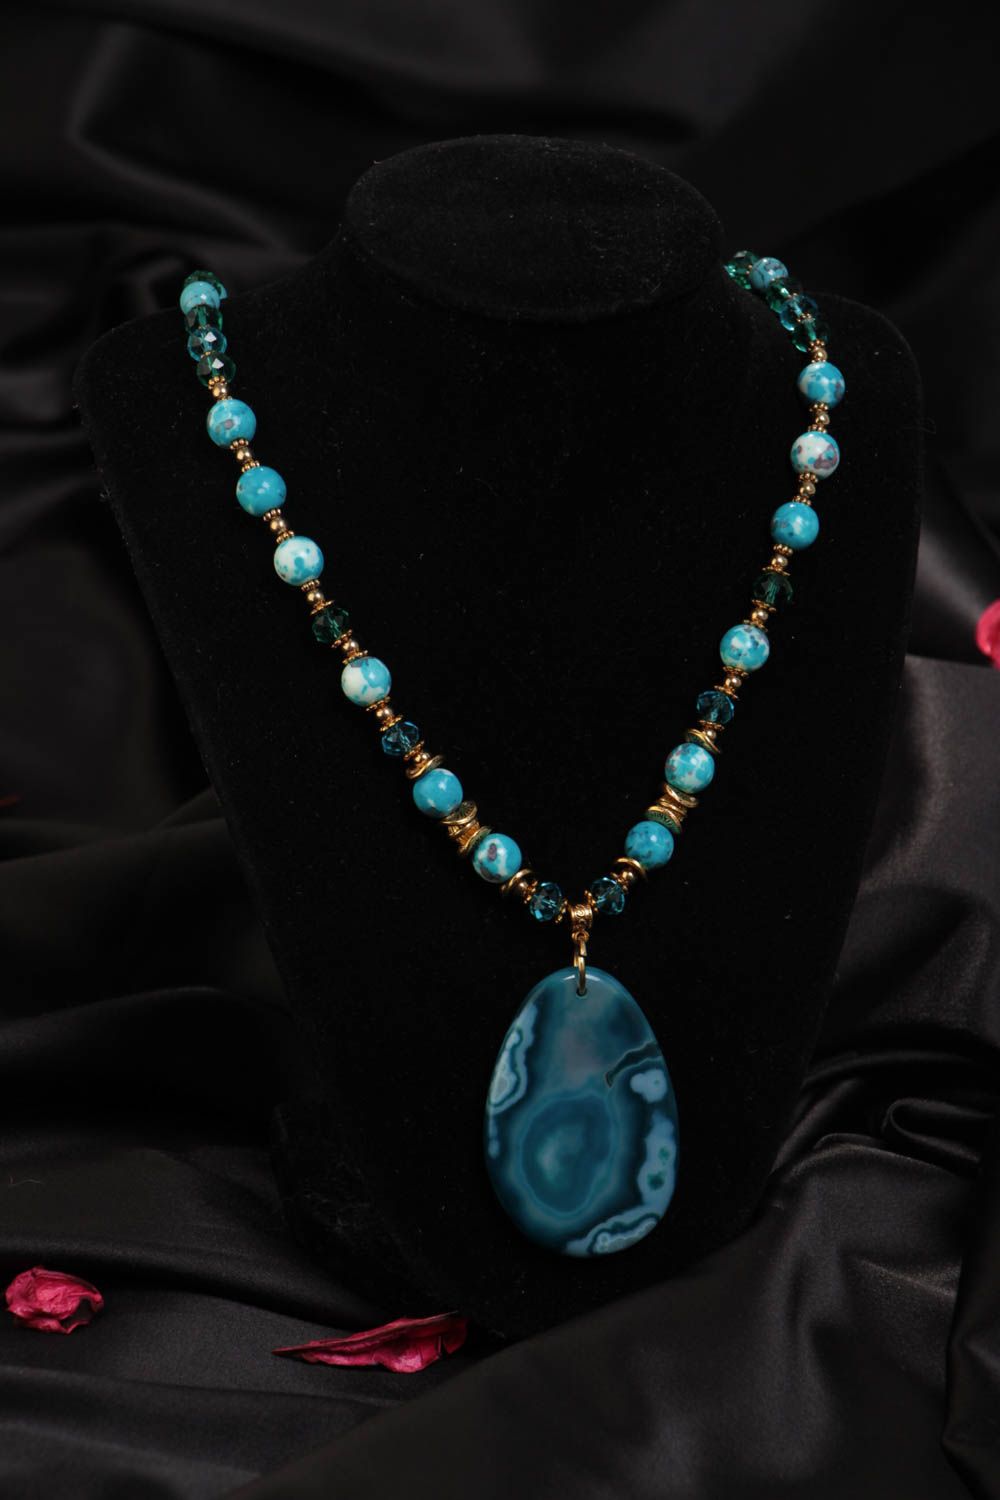 Necklace made of natural stones with charm handmade with agate and jasper photo 1